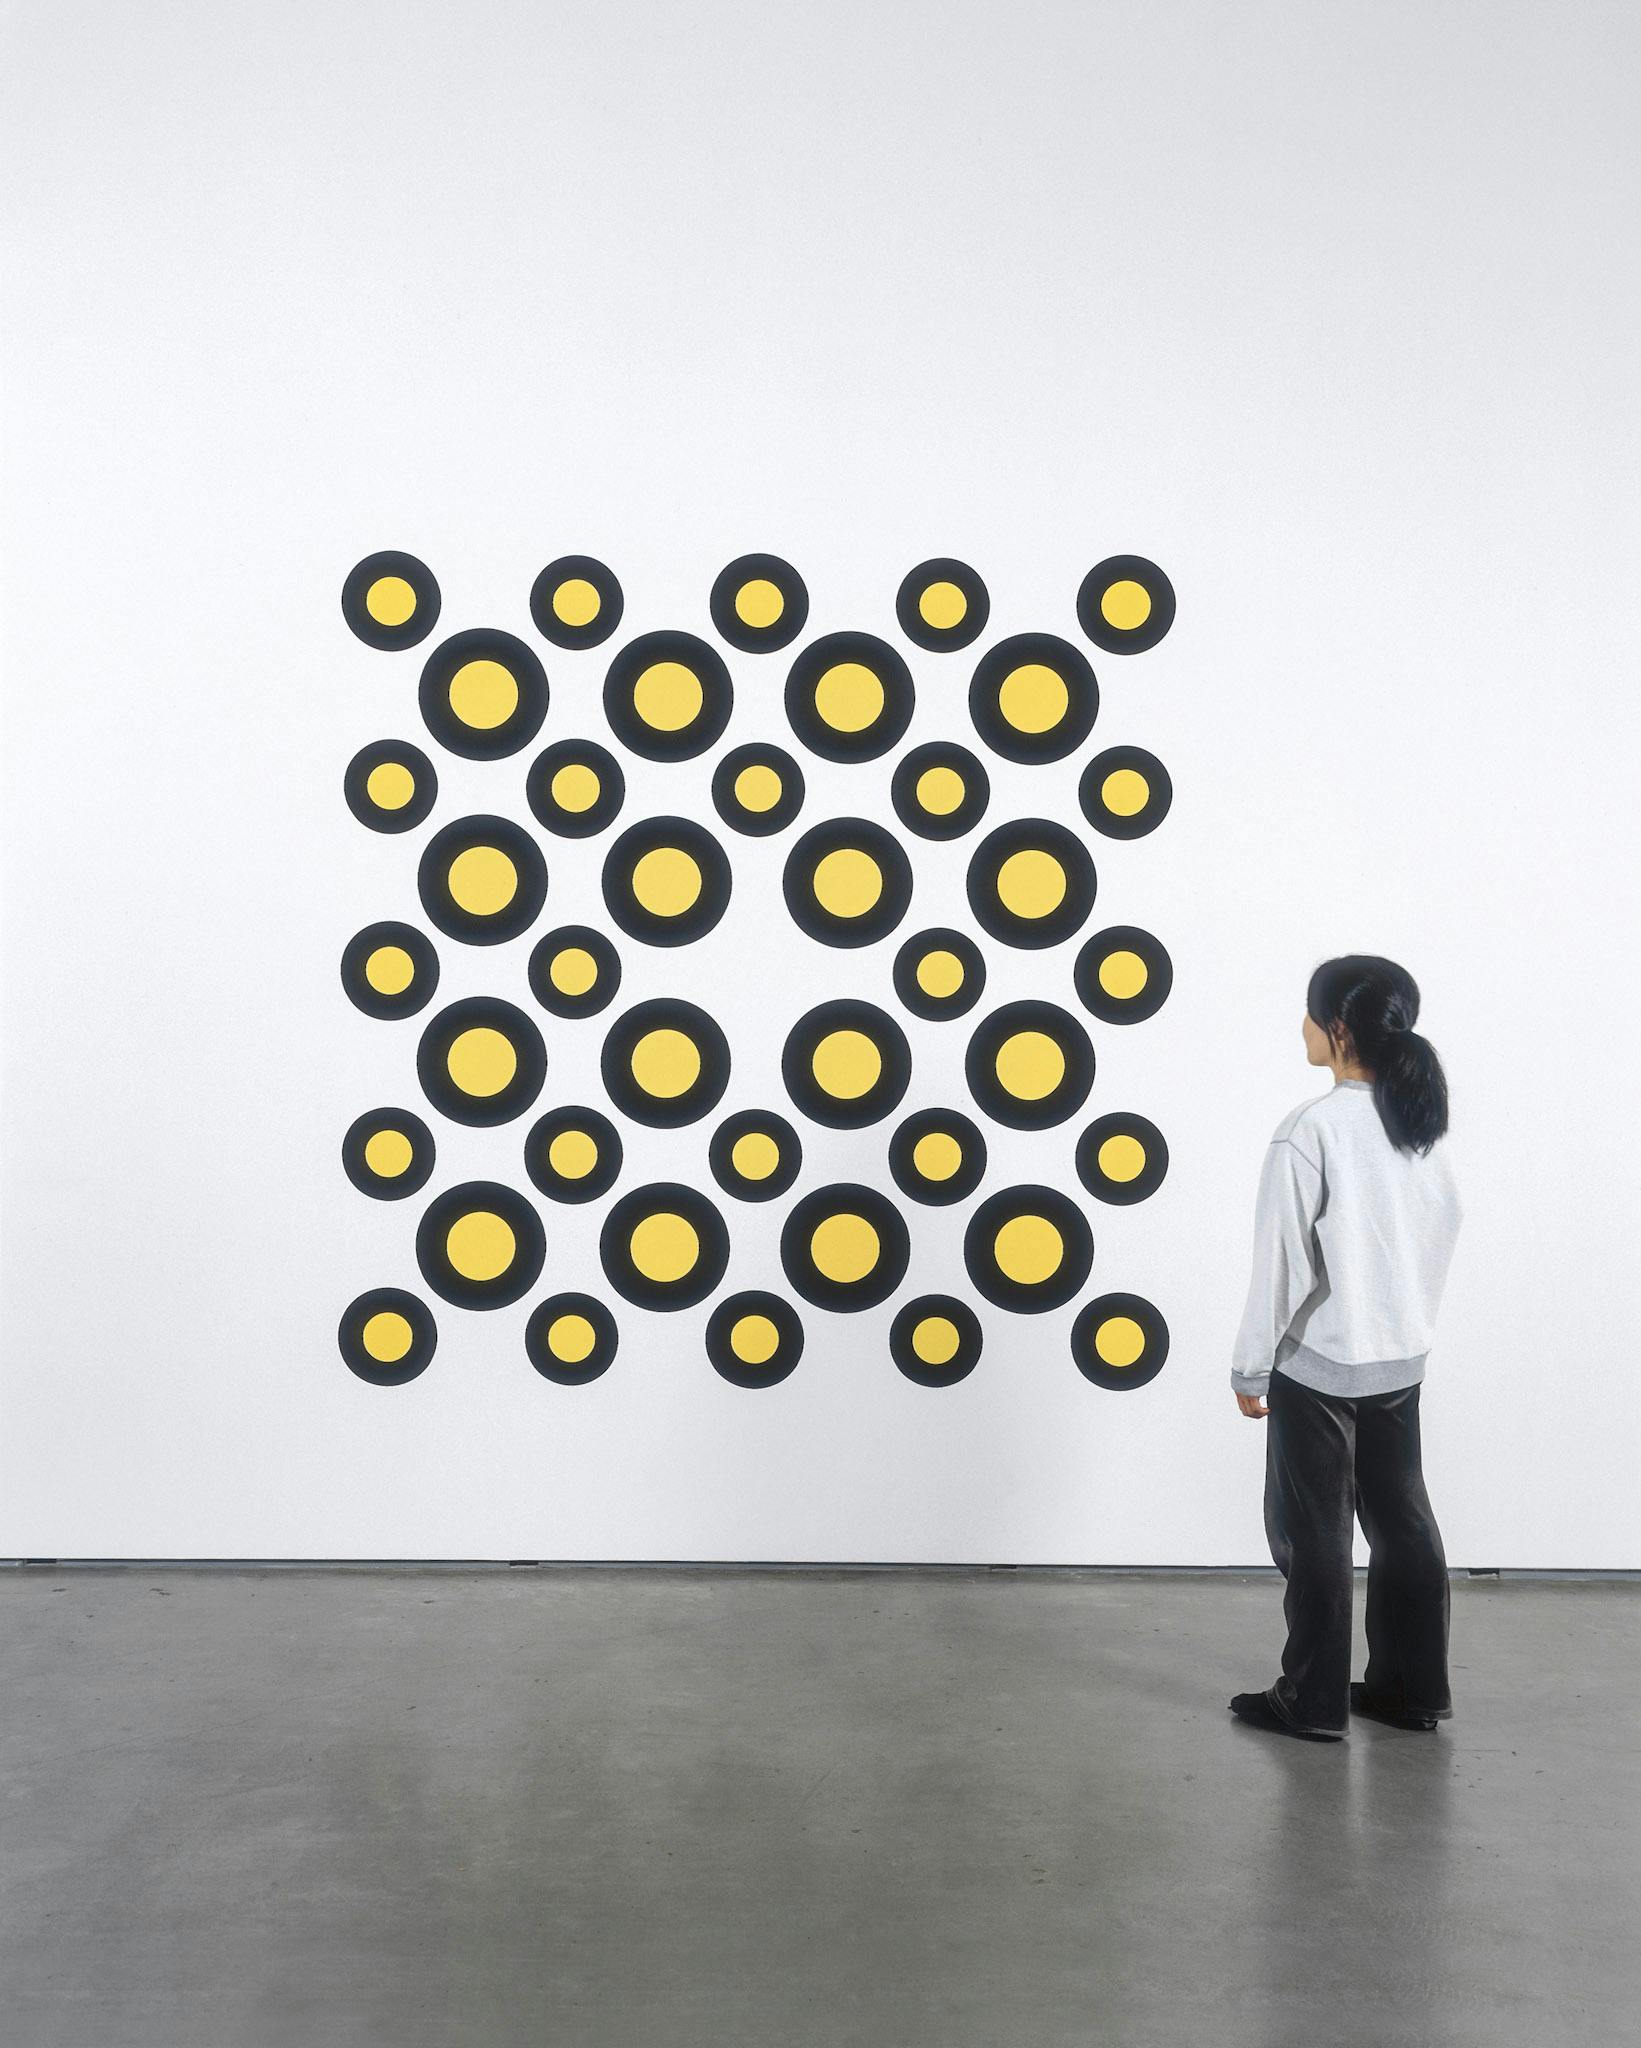 Installation image of a painting by Neil Campbell. The work consists of many yellow circles outlined by thick bold black lines. The painting is as tall as a person standing near it.